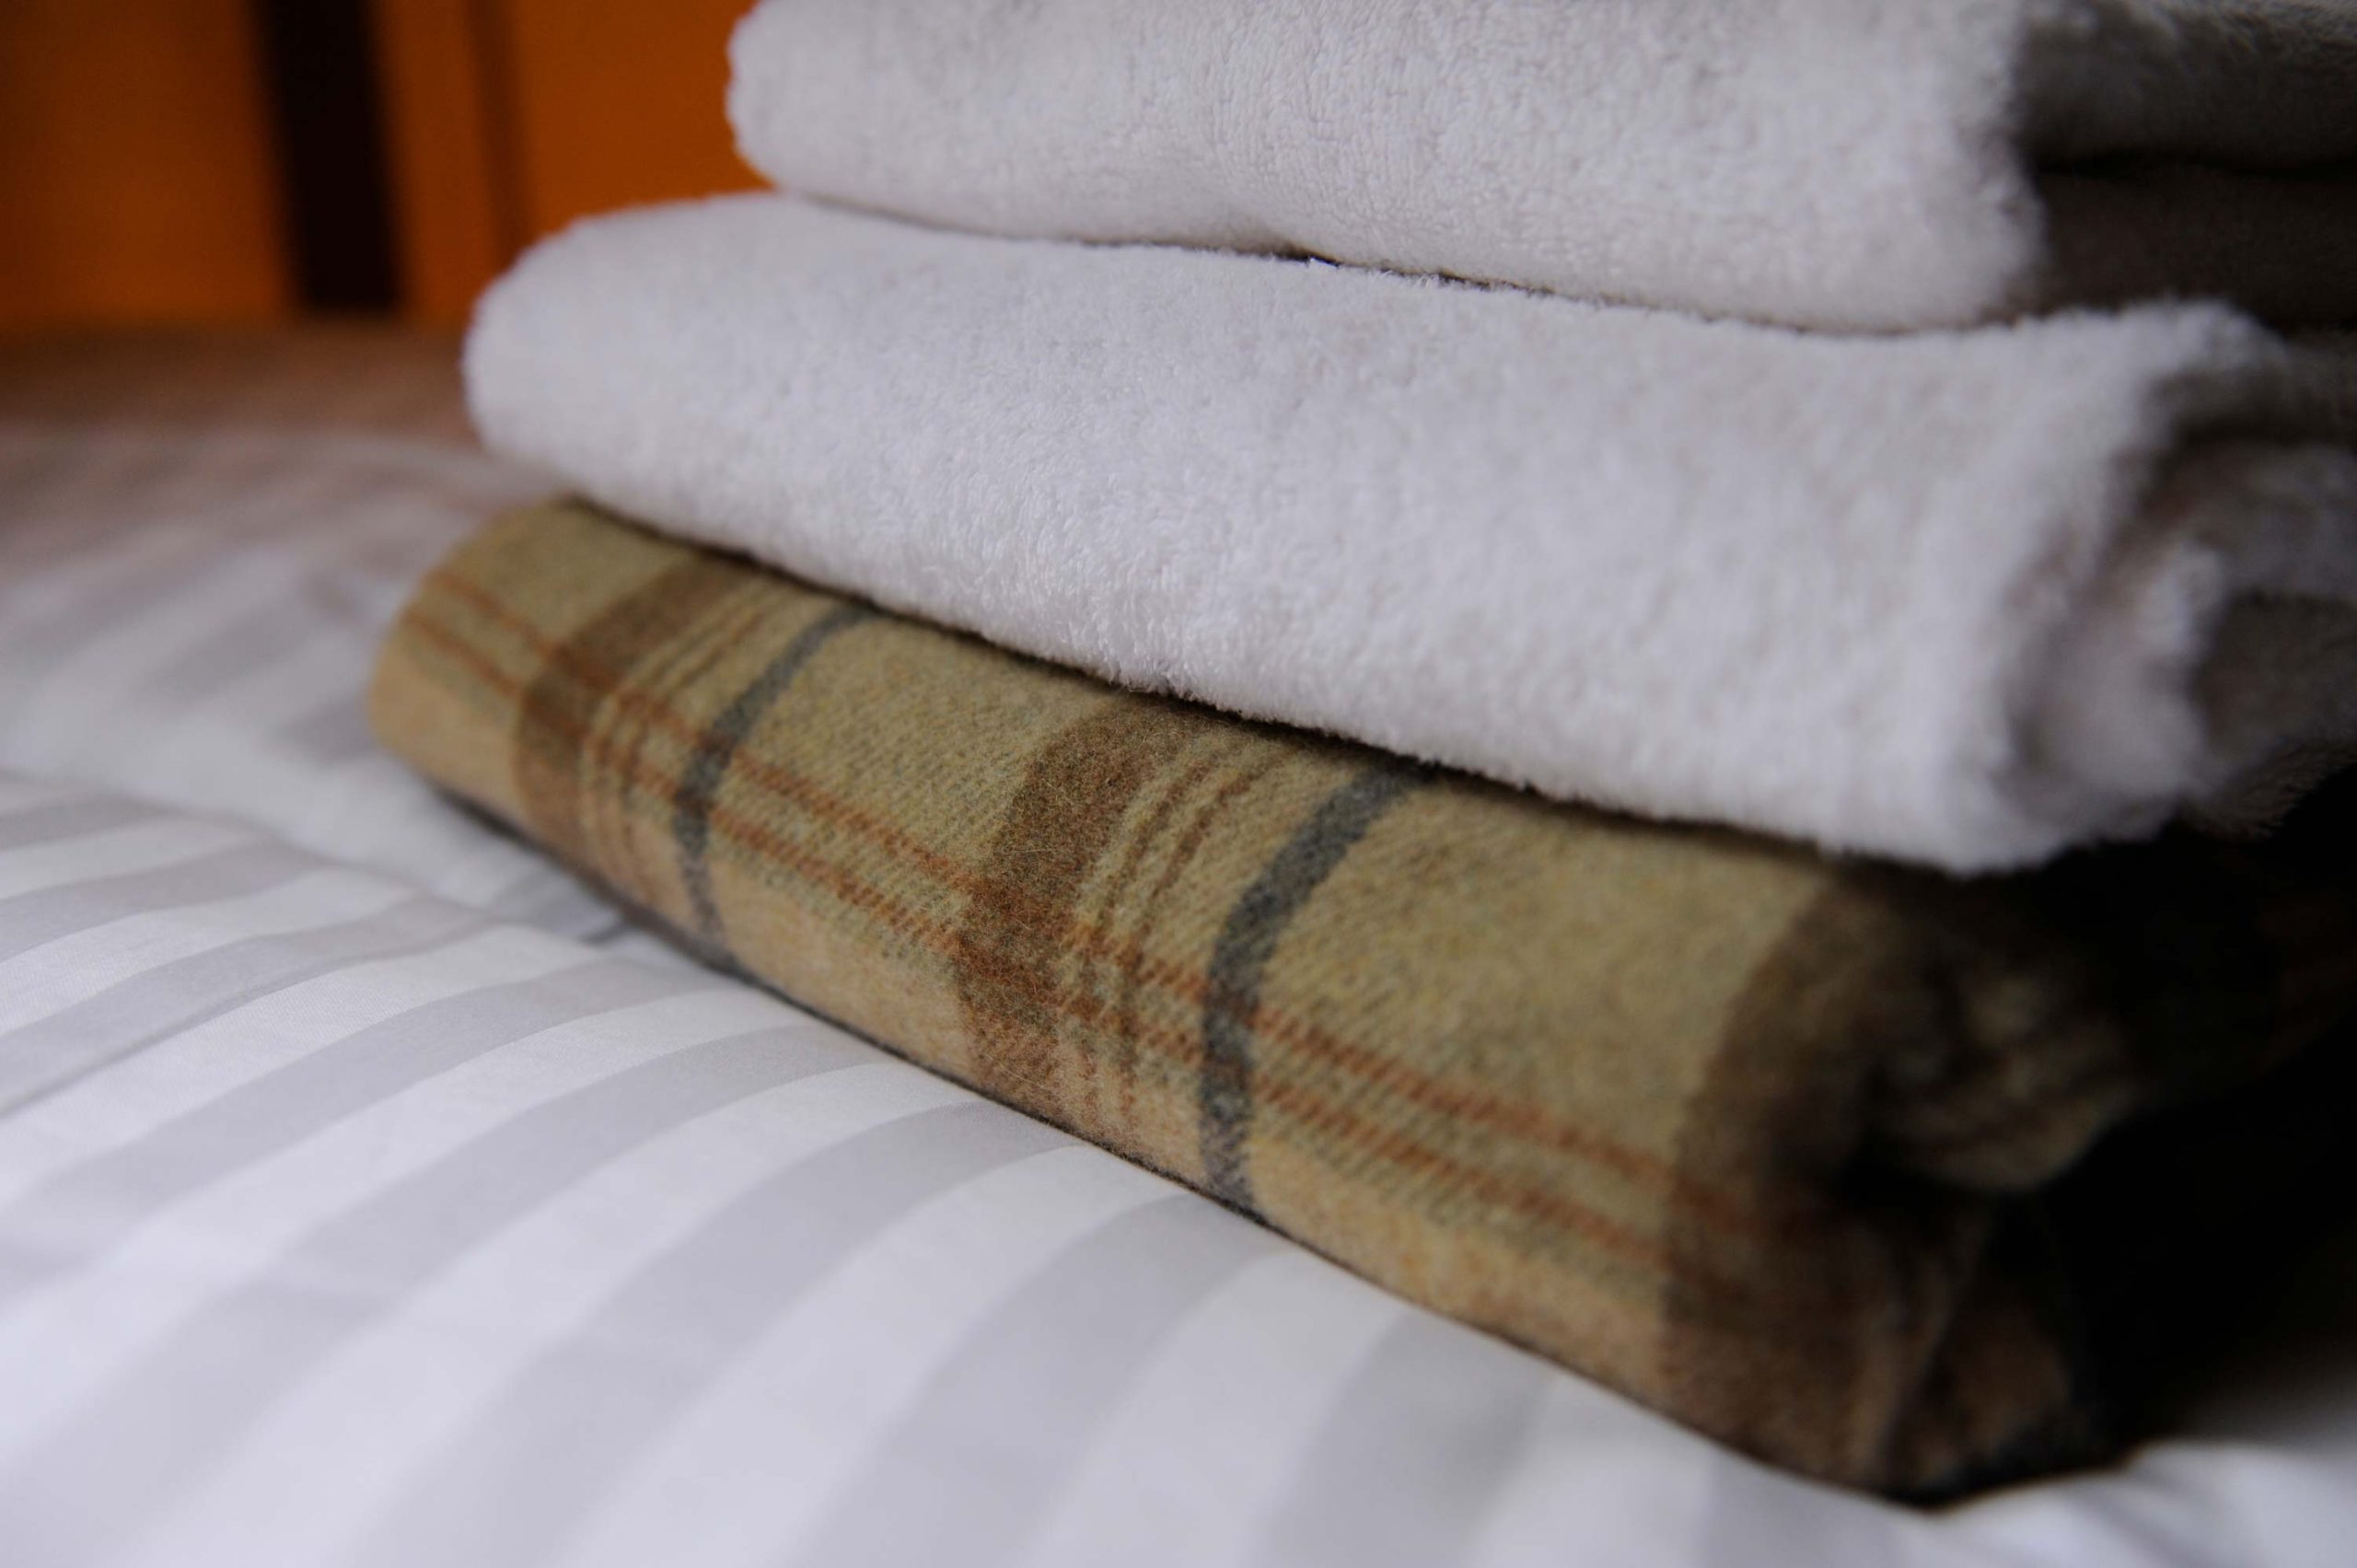 Blankets and towels stacked on one of the beds in lodge at Loose Reins